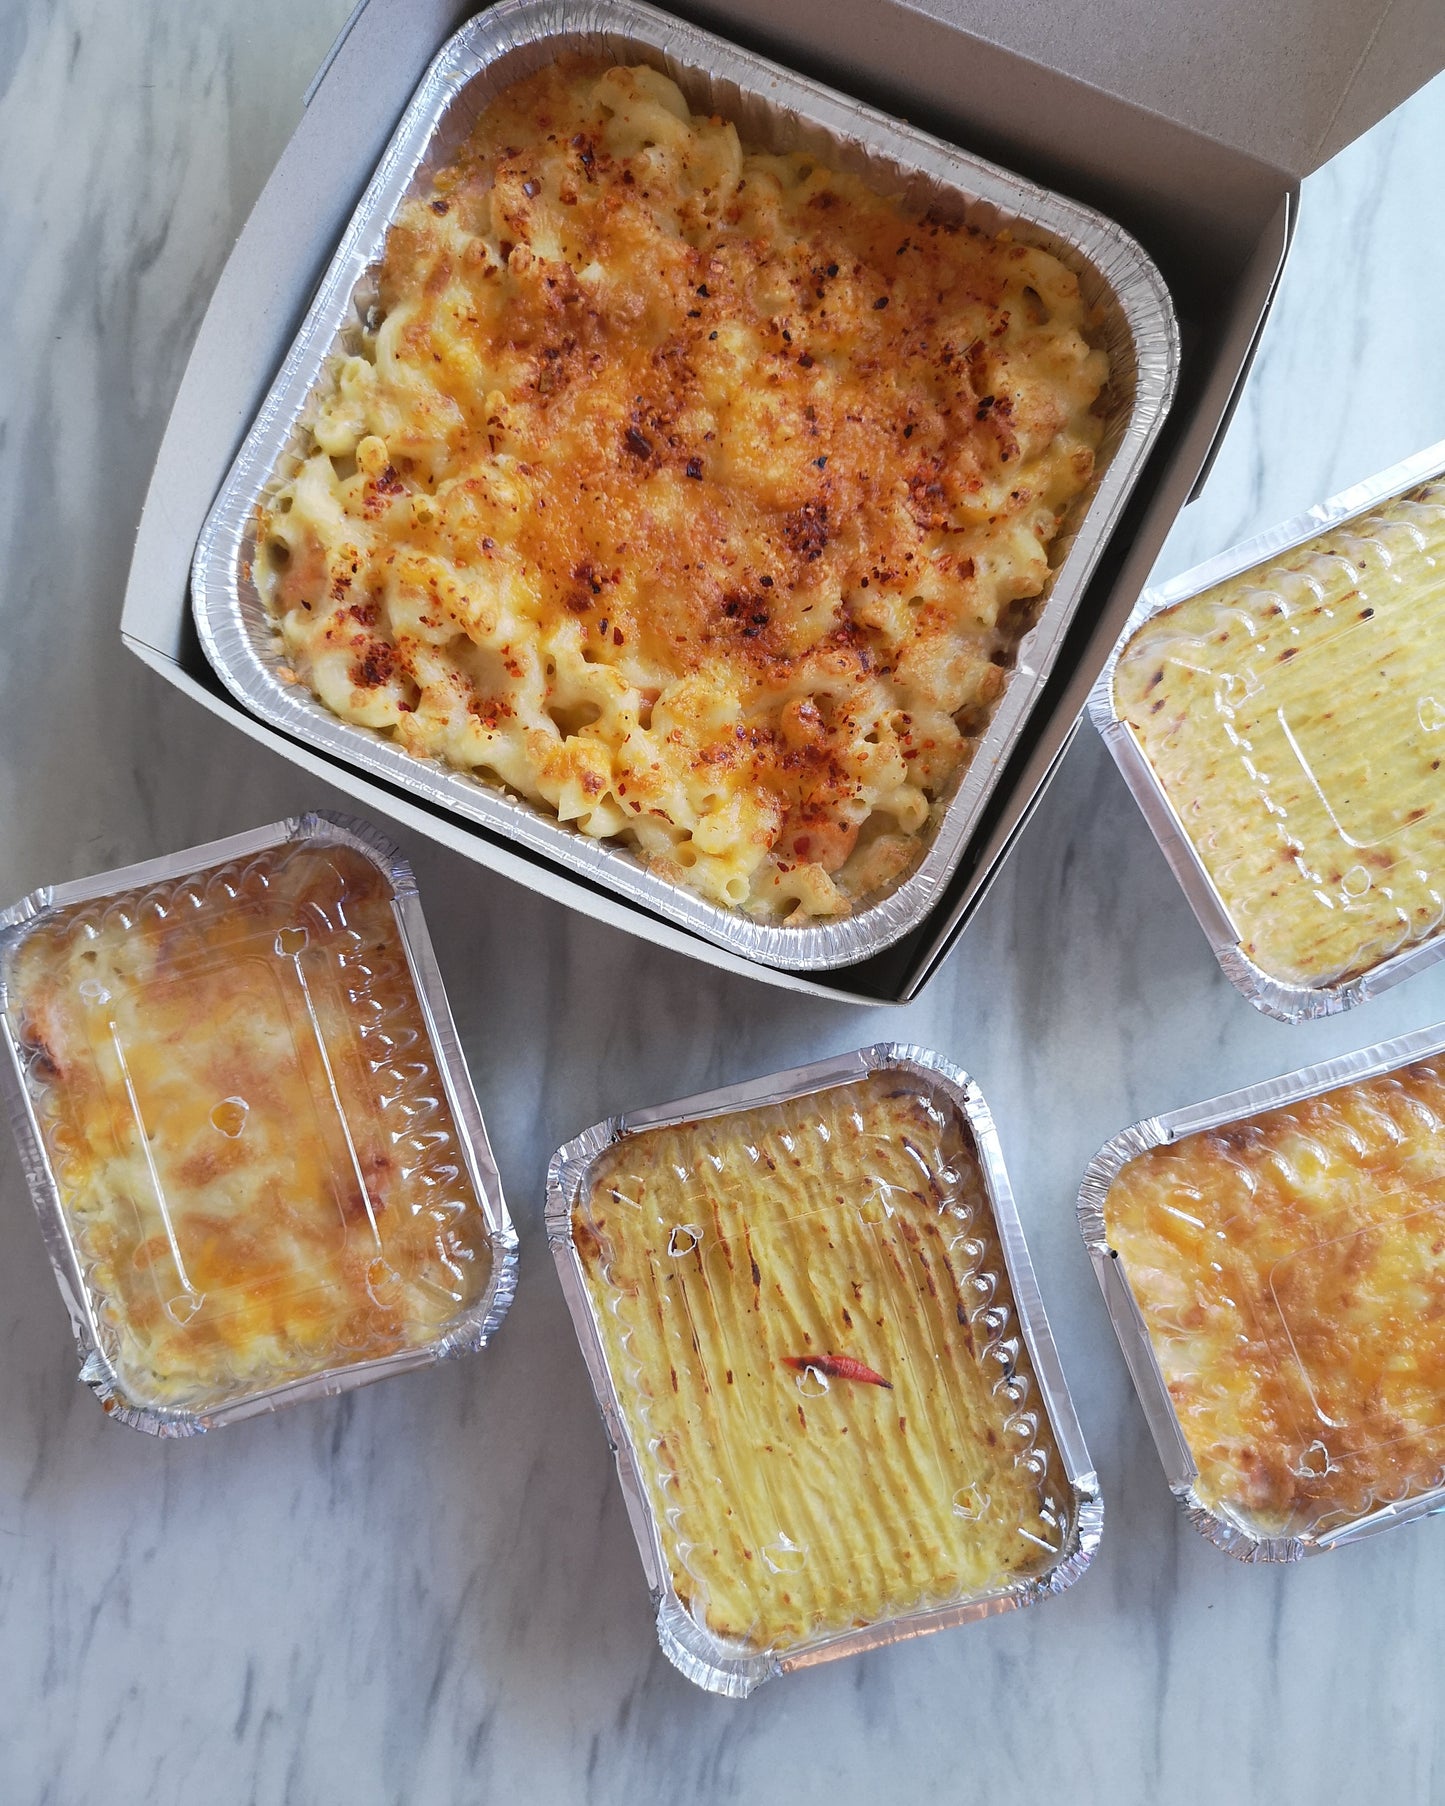 *NEW* with Cheese! Shepherds' Pie